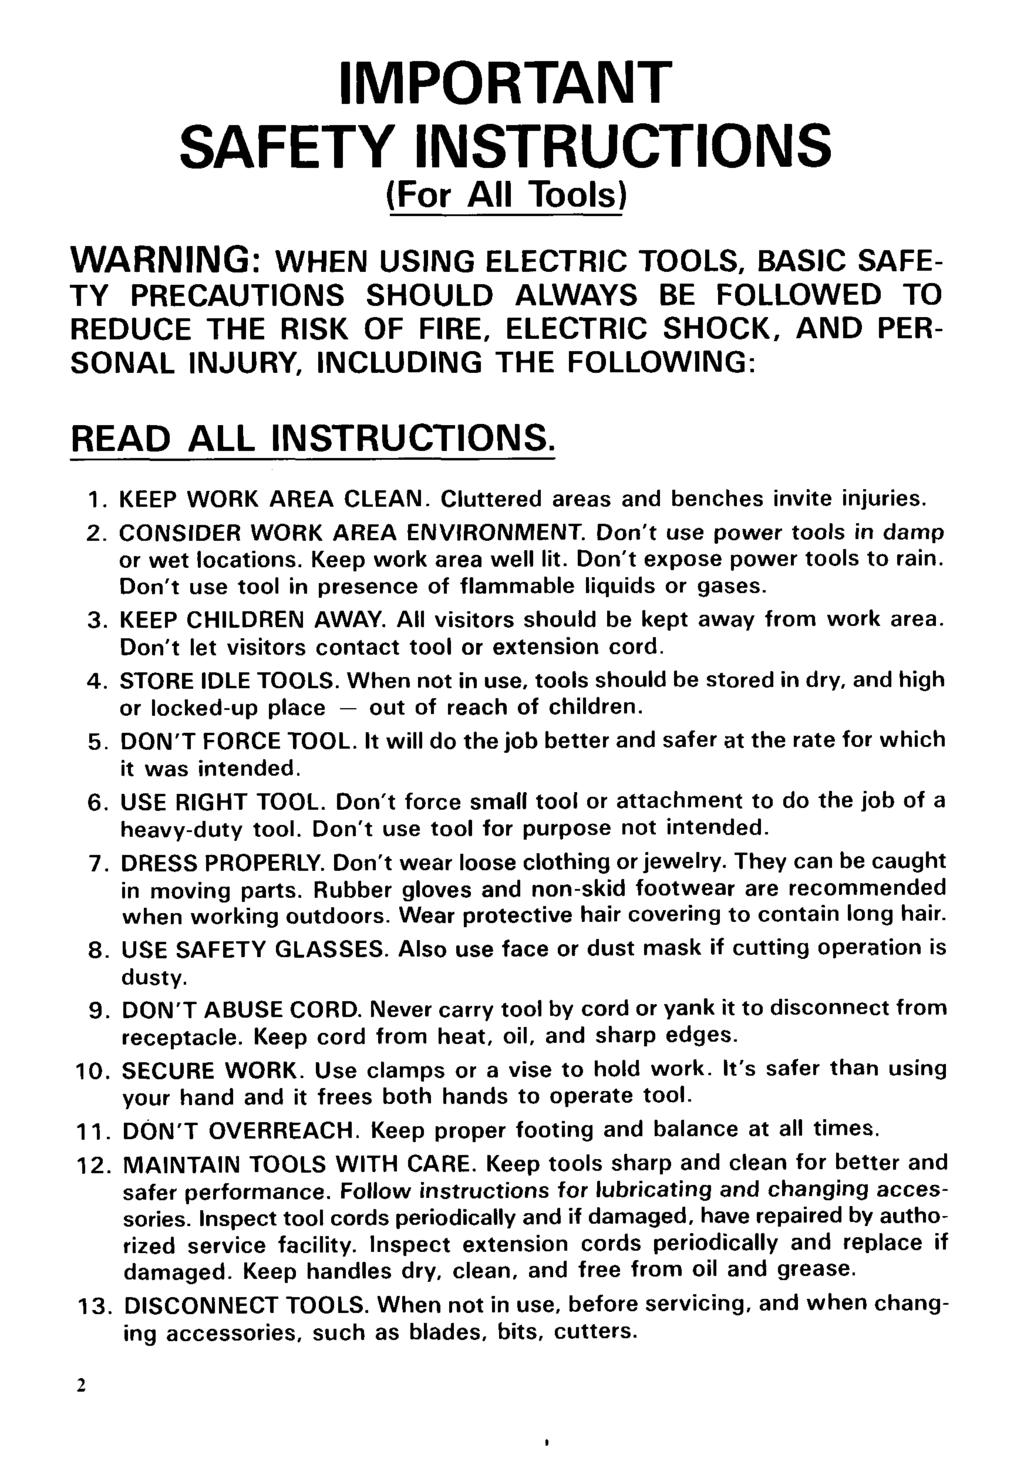 IMPORTANT SAFETY INSTRUCTIONS (For All Tools) WARNING: WHEN USING ELECTRIC TOOLS, BASIC SAFE- TY PRECAUTIONS SHOULD ALWAYS BE FOLLOWED TO REDUCE THE RISK OF FIRE, ELECTRIC SHOCK, AND PER- SONAL